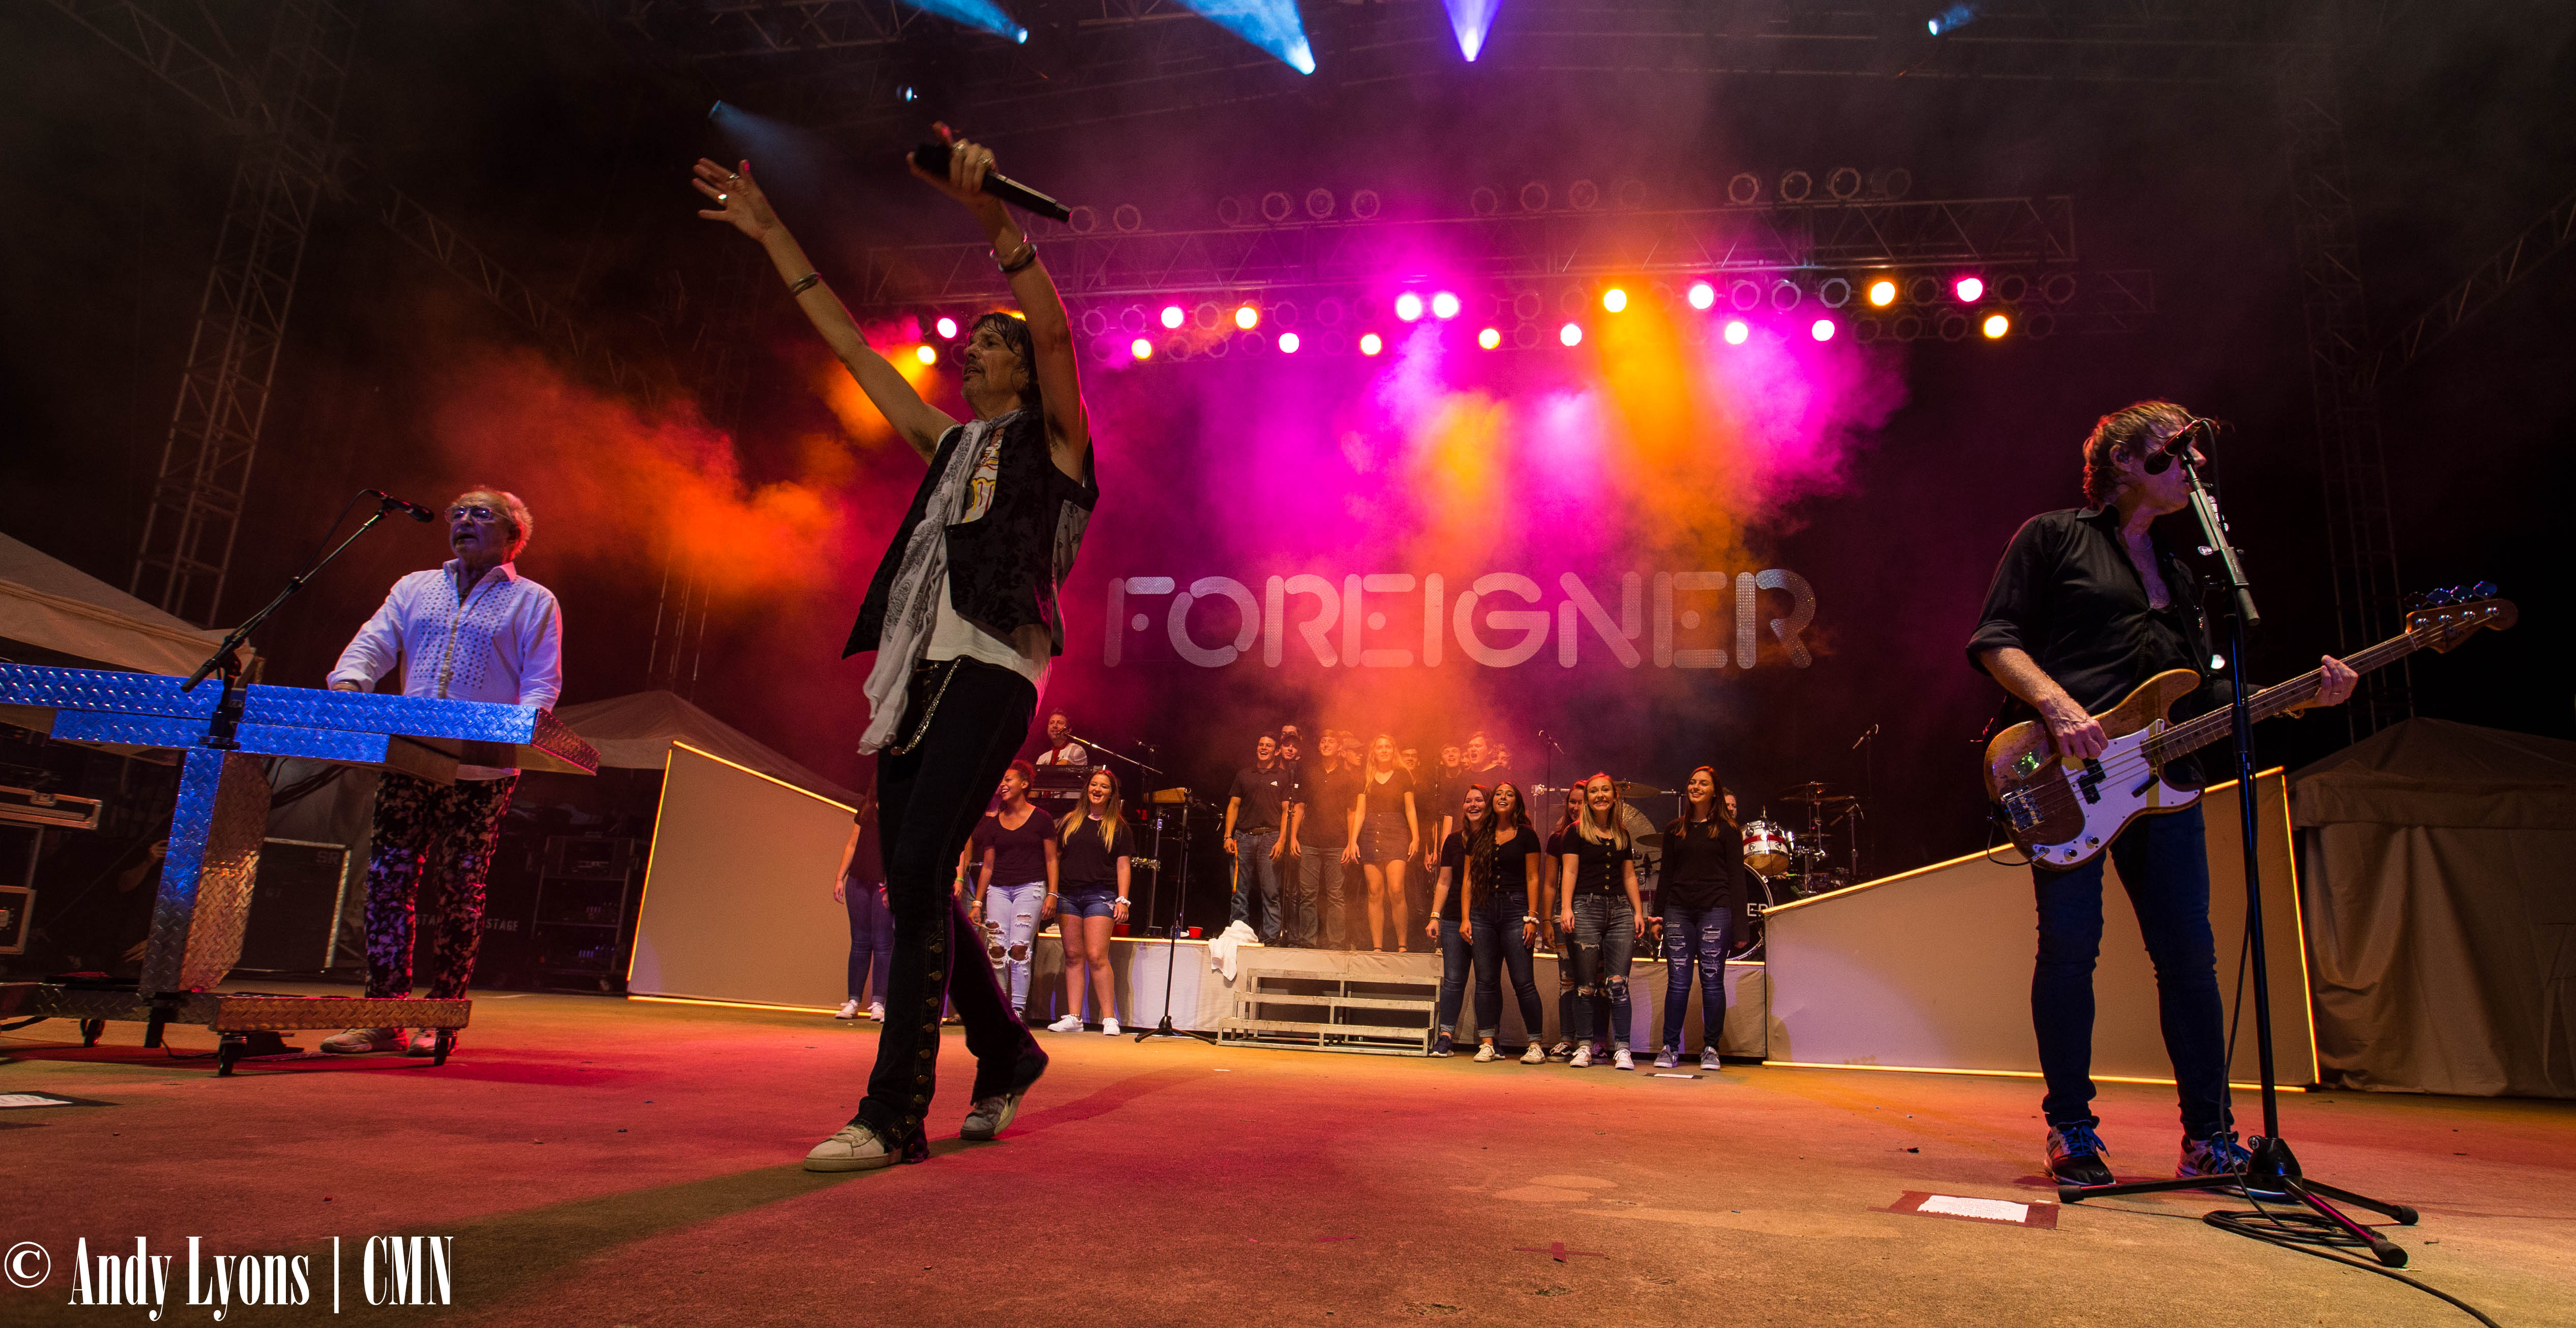 Foreigner bridge multiple generations with show at Missouri State Fair